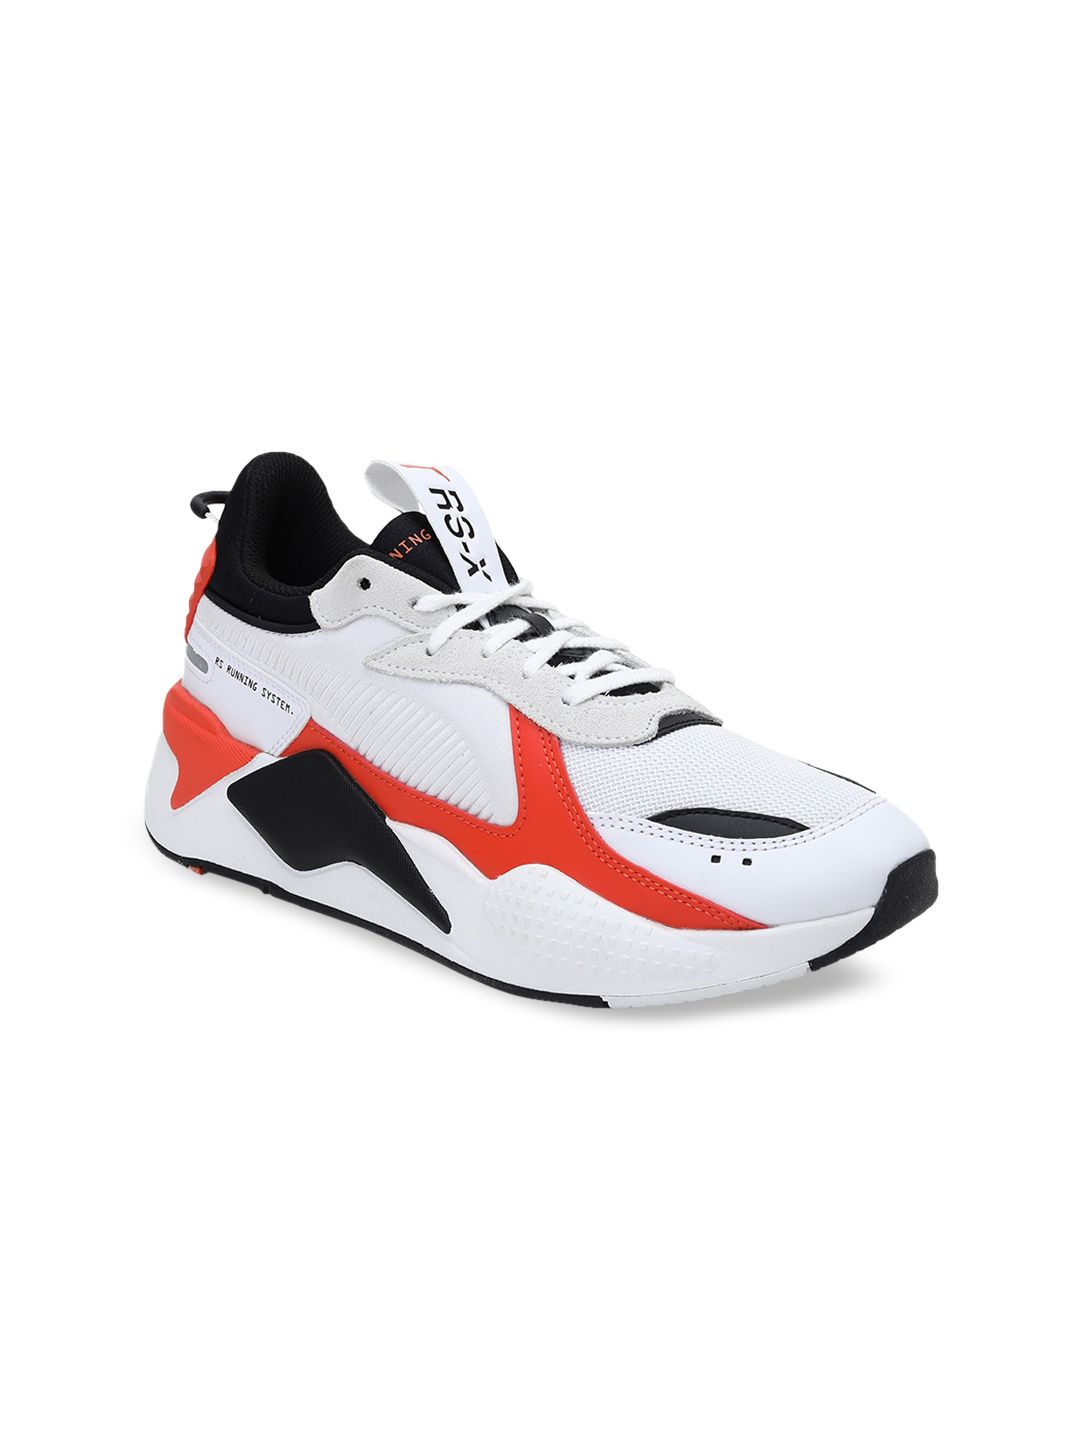 Puma Unisex White & Red RS-X Mix Sneakers Price in India